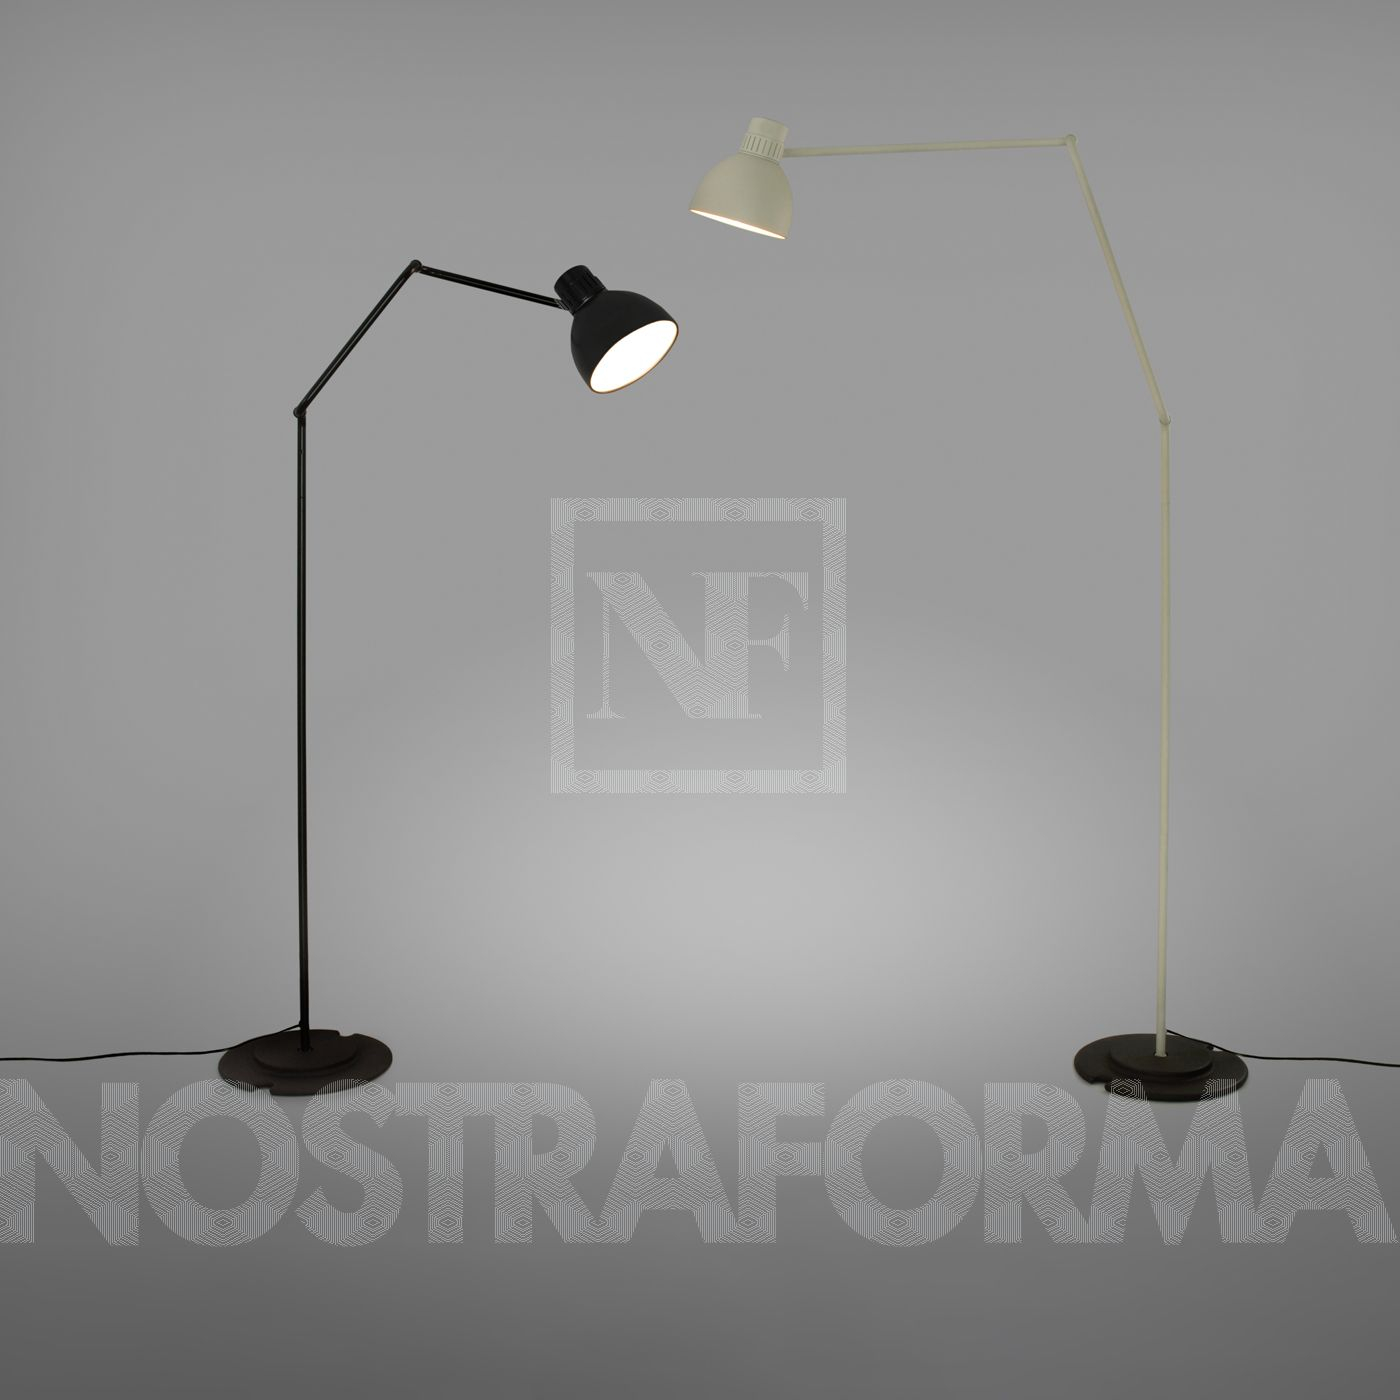 Blux System 50 Floor Lamp intended for dimensions 1400 X 1400